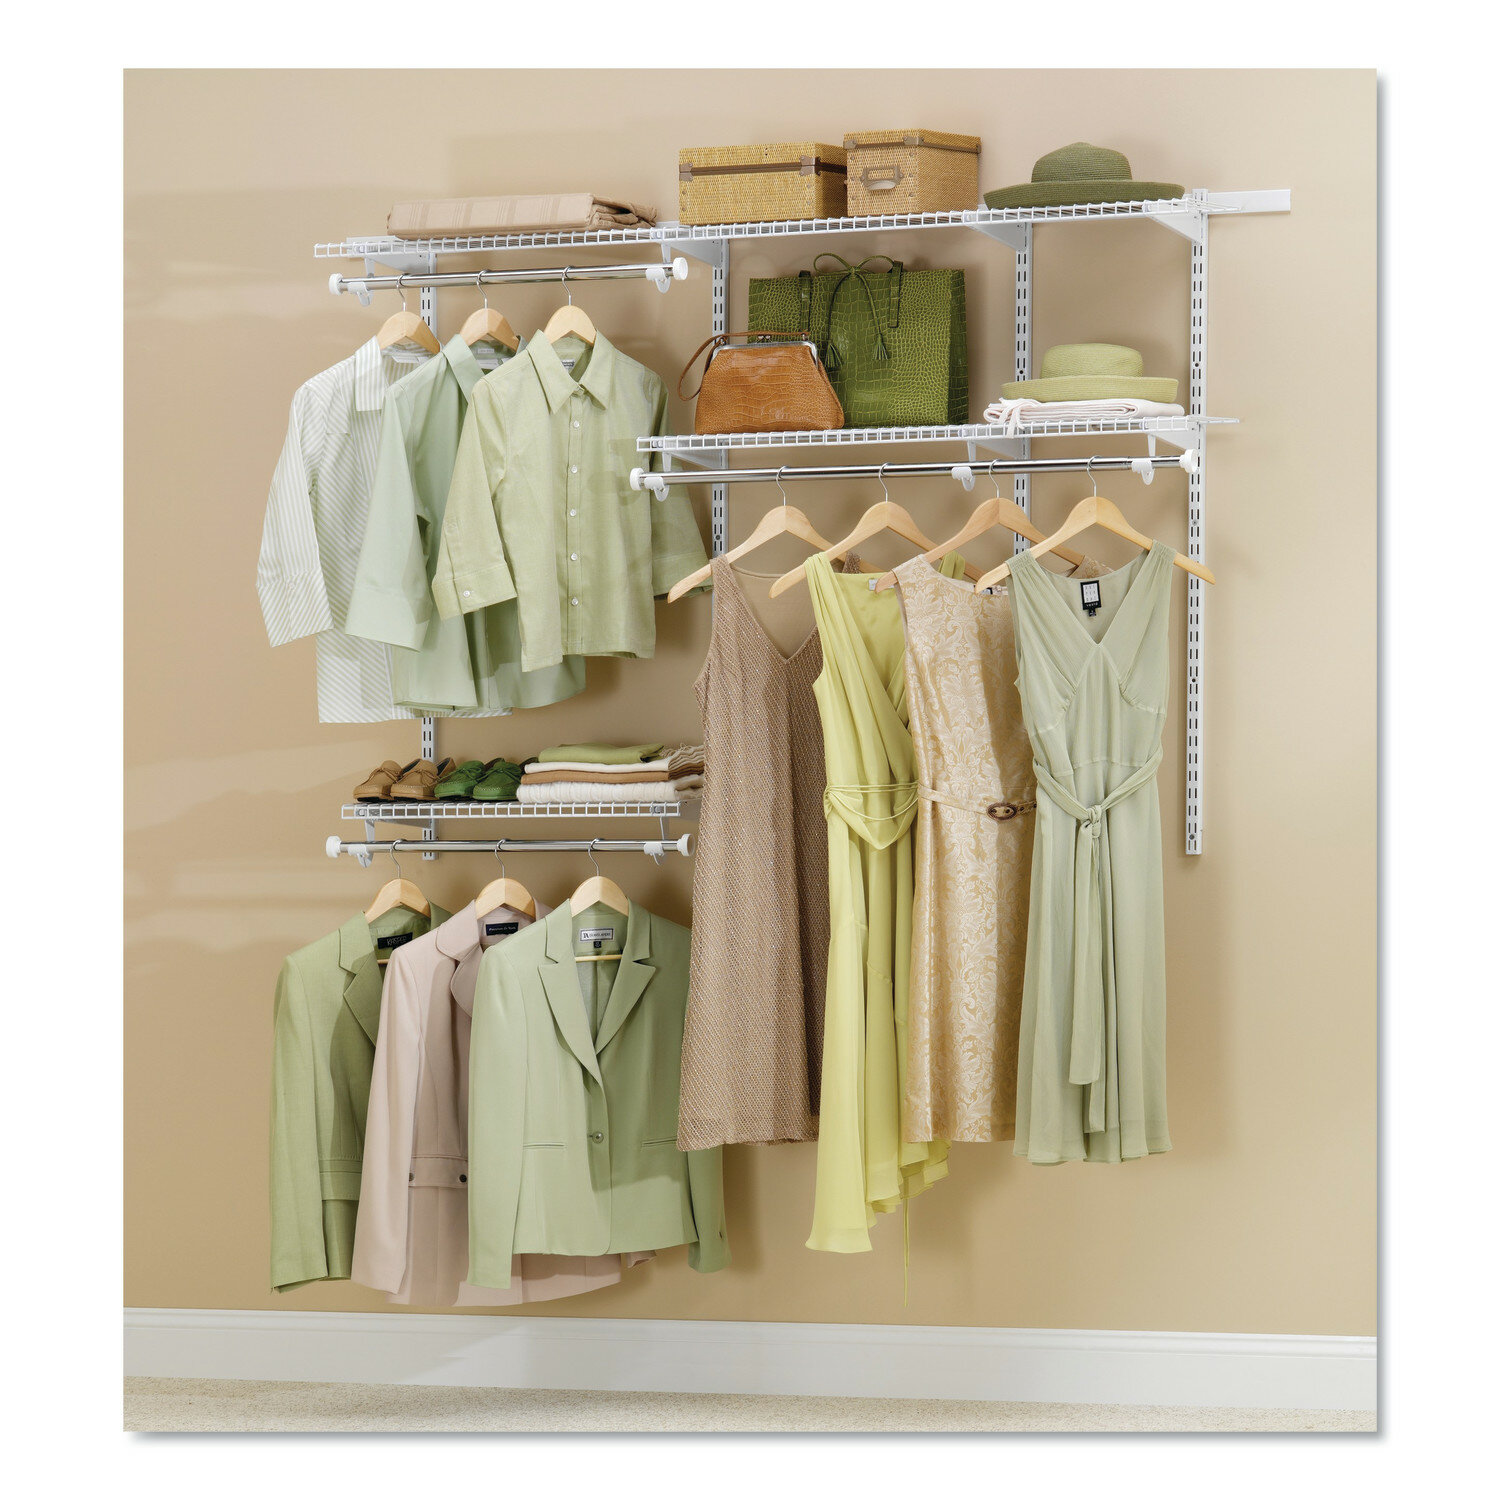 Rubbermaid Custom Closet Kit Review: Expands and Adjusts